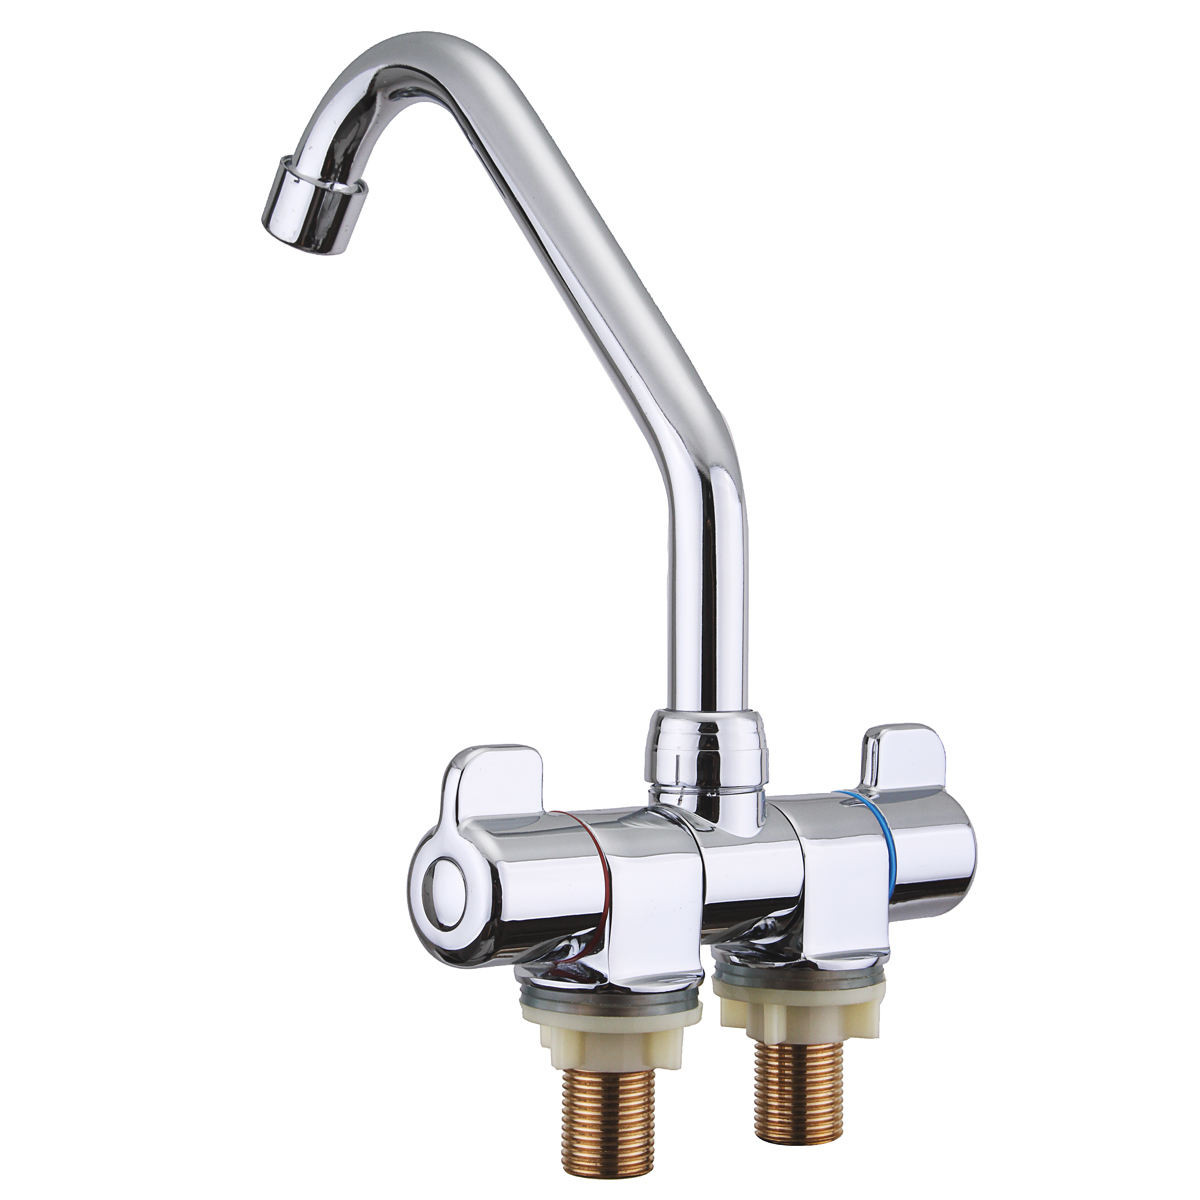 

Kitchen Sink Basin Faucet 360° Rotating Spout Hot and Cold Water Mixer Tap Bathroom